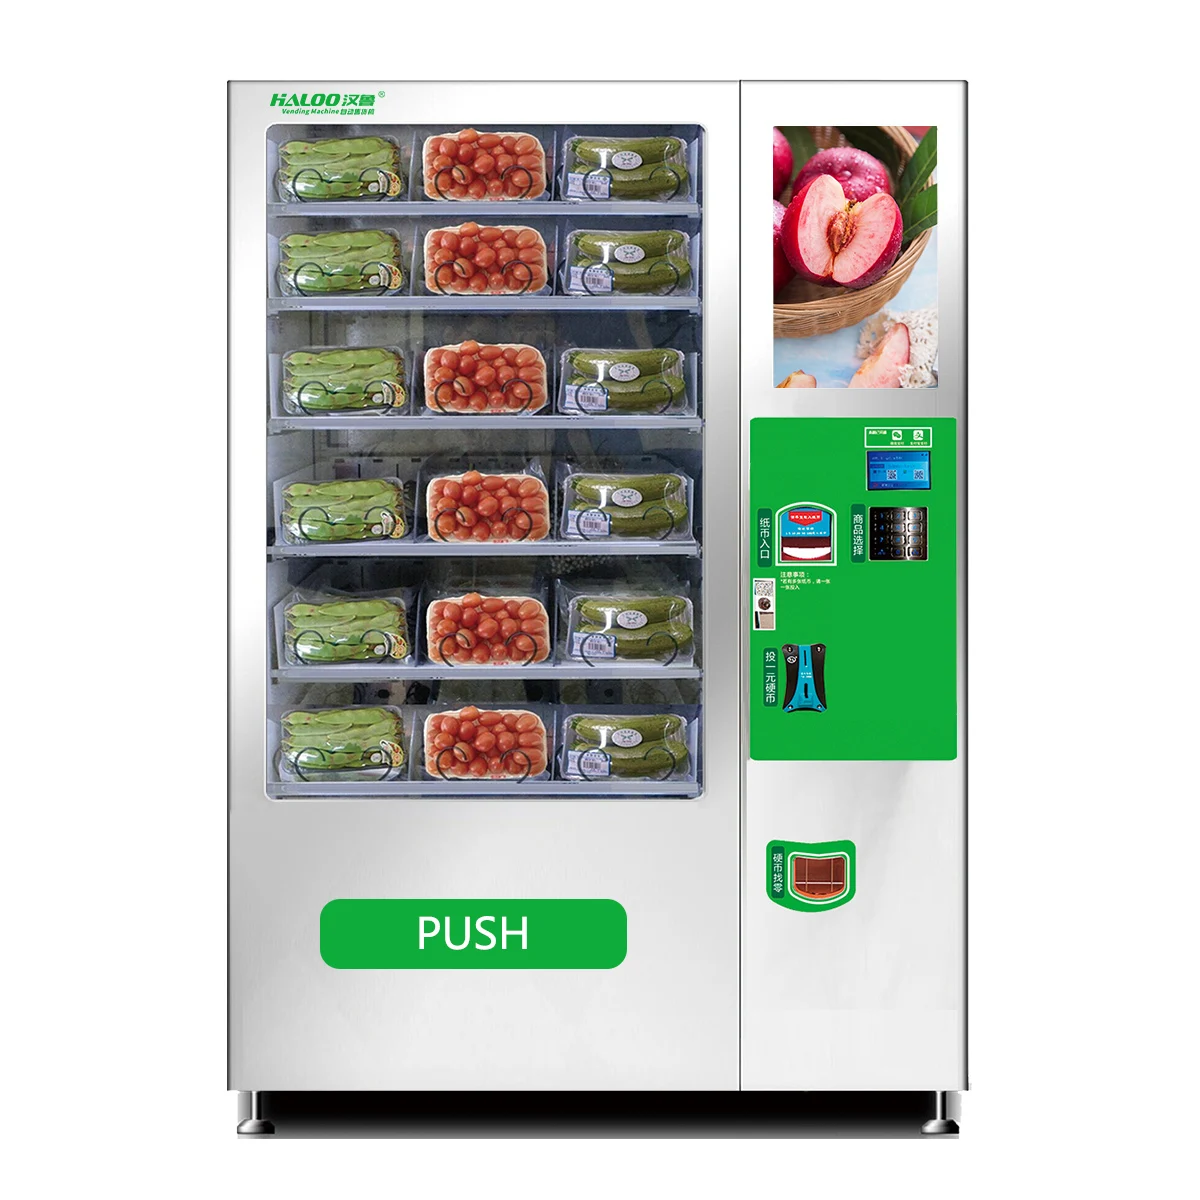 E-wallet pay drink and snack vending machine for Euro